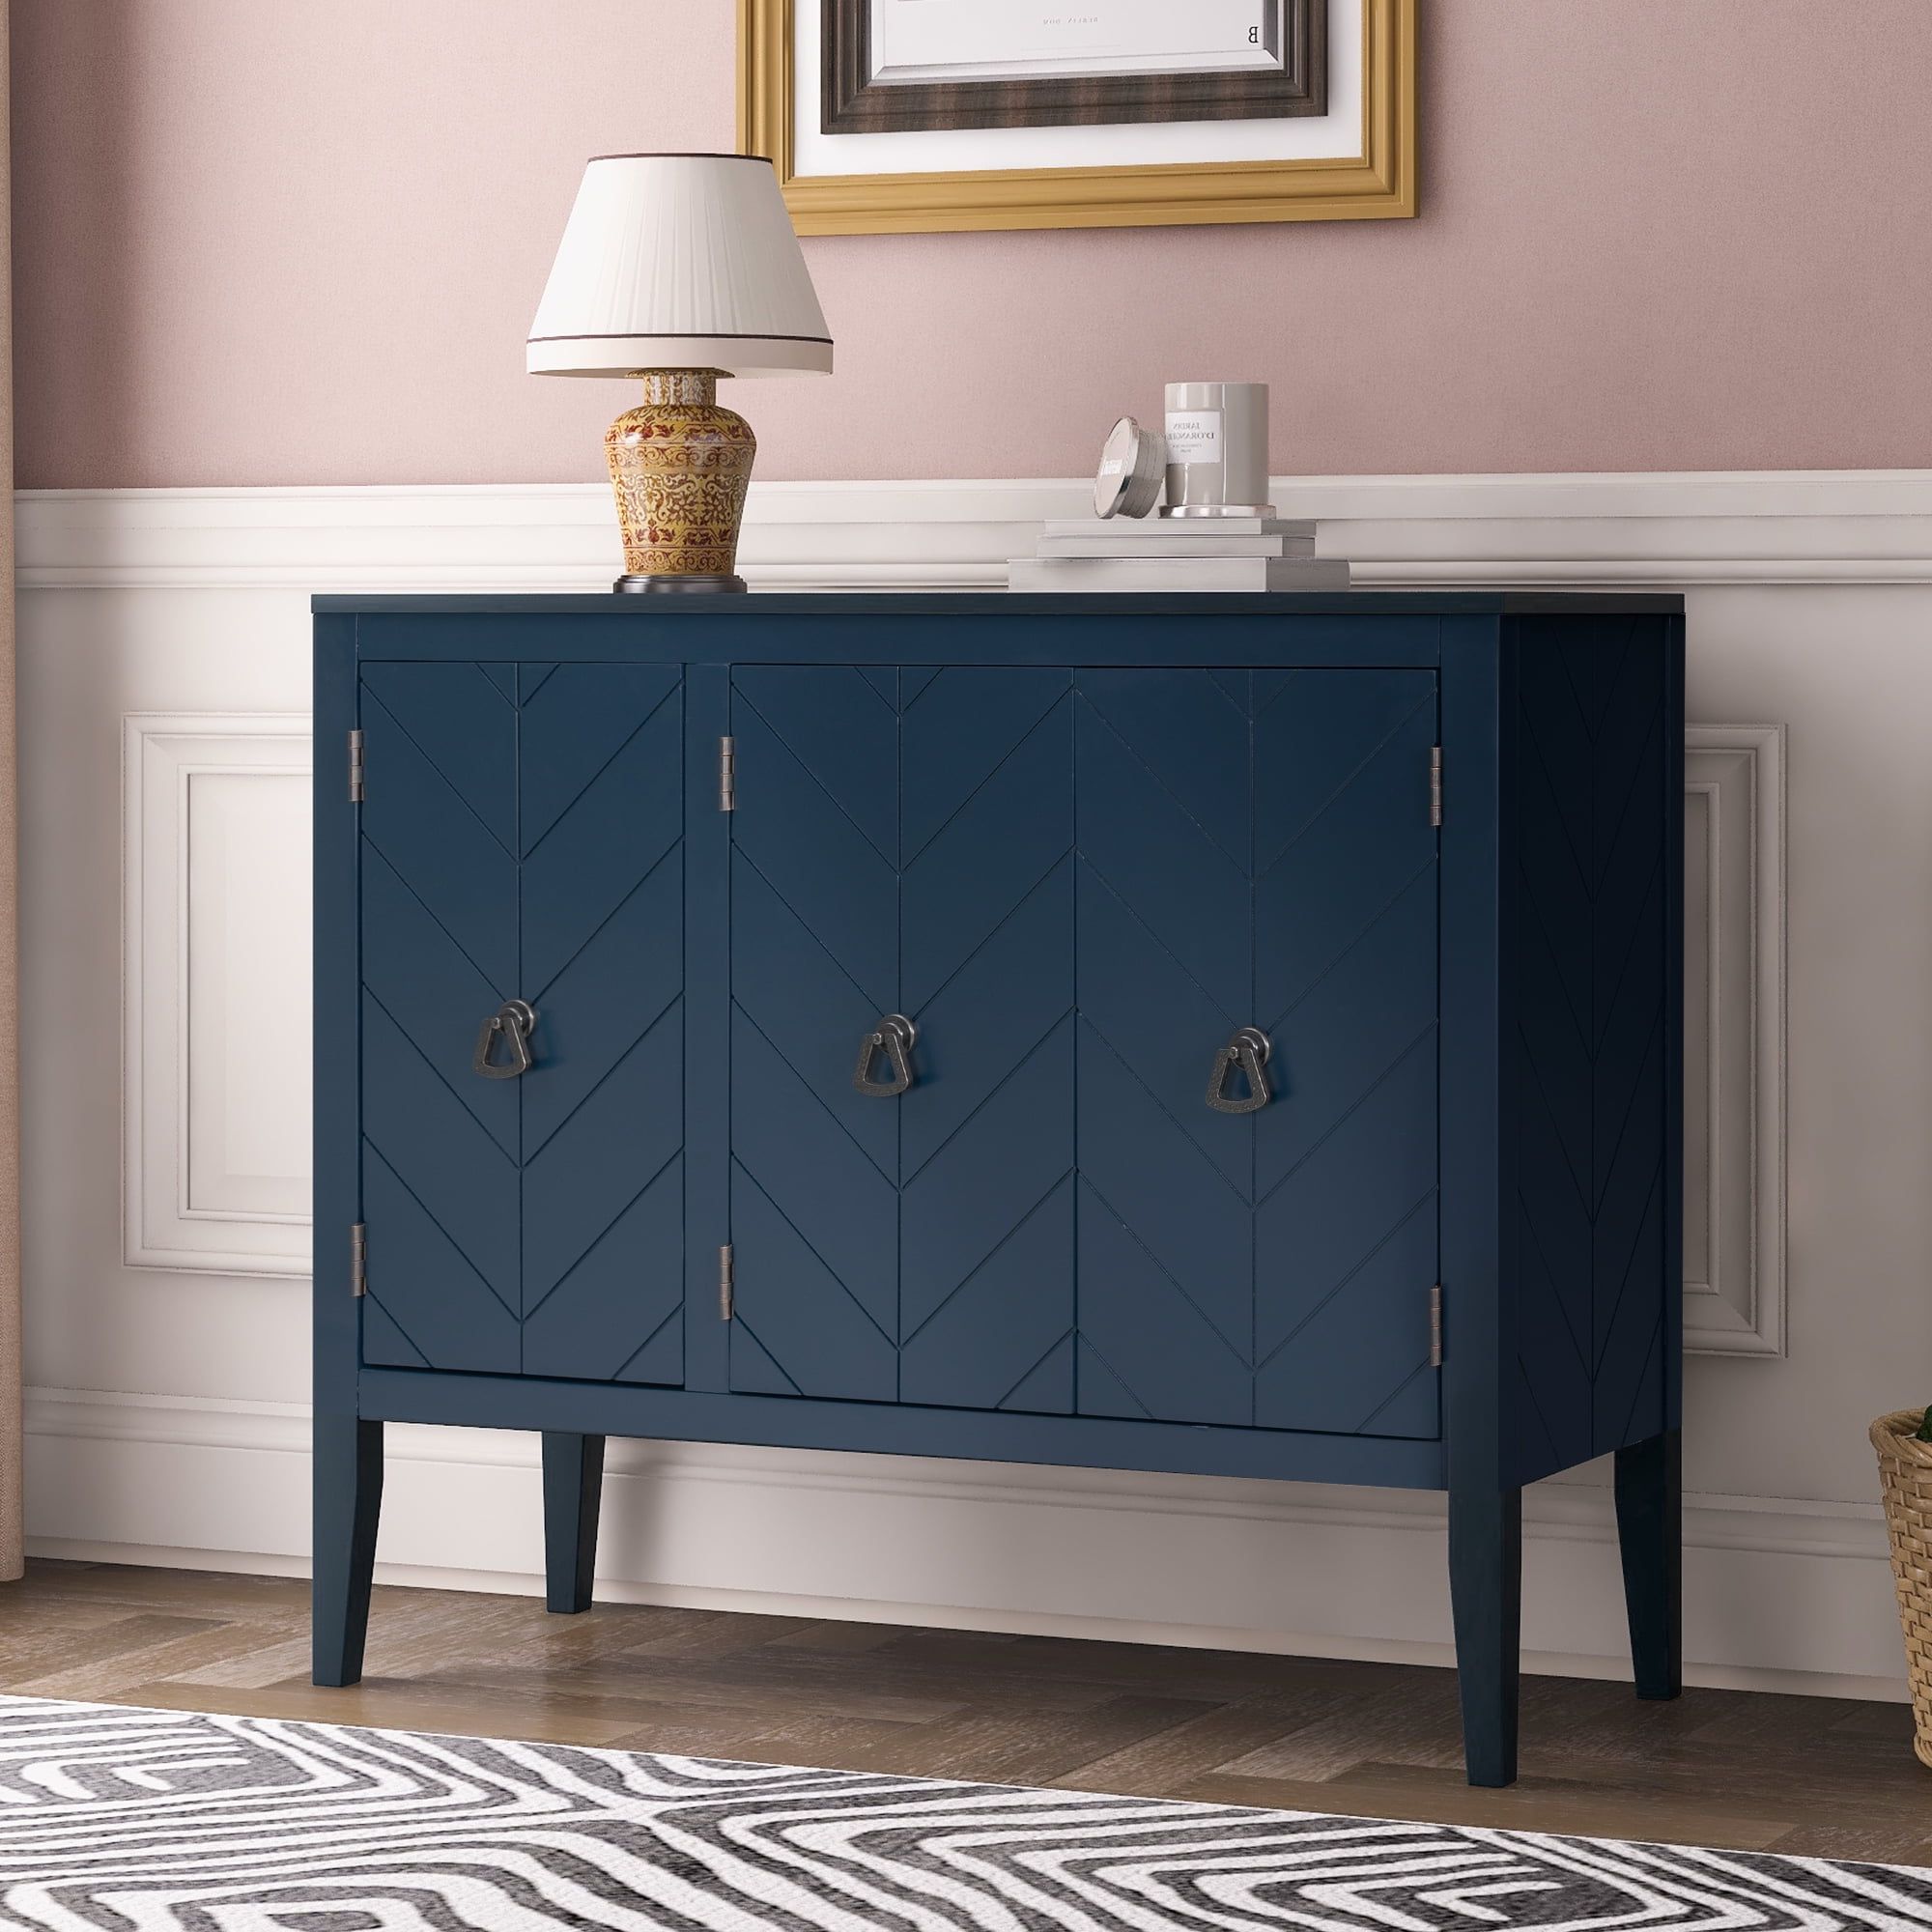 Clearance! Console Table With Storage, Mid Century Sideboard Buffet  Cabinet, Blue Wooden Buffet Cabinet, 3 Door Accent Cabinet For Living Room,  Entryway, Corridor, 37 X 15.7 X 31.5 Inch, Ja3981 – Walmart Pertaining To Navy Blue Sideboards (Gallery 10 of 20)